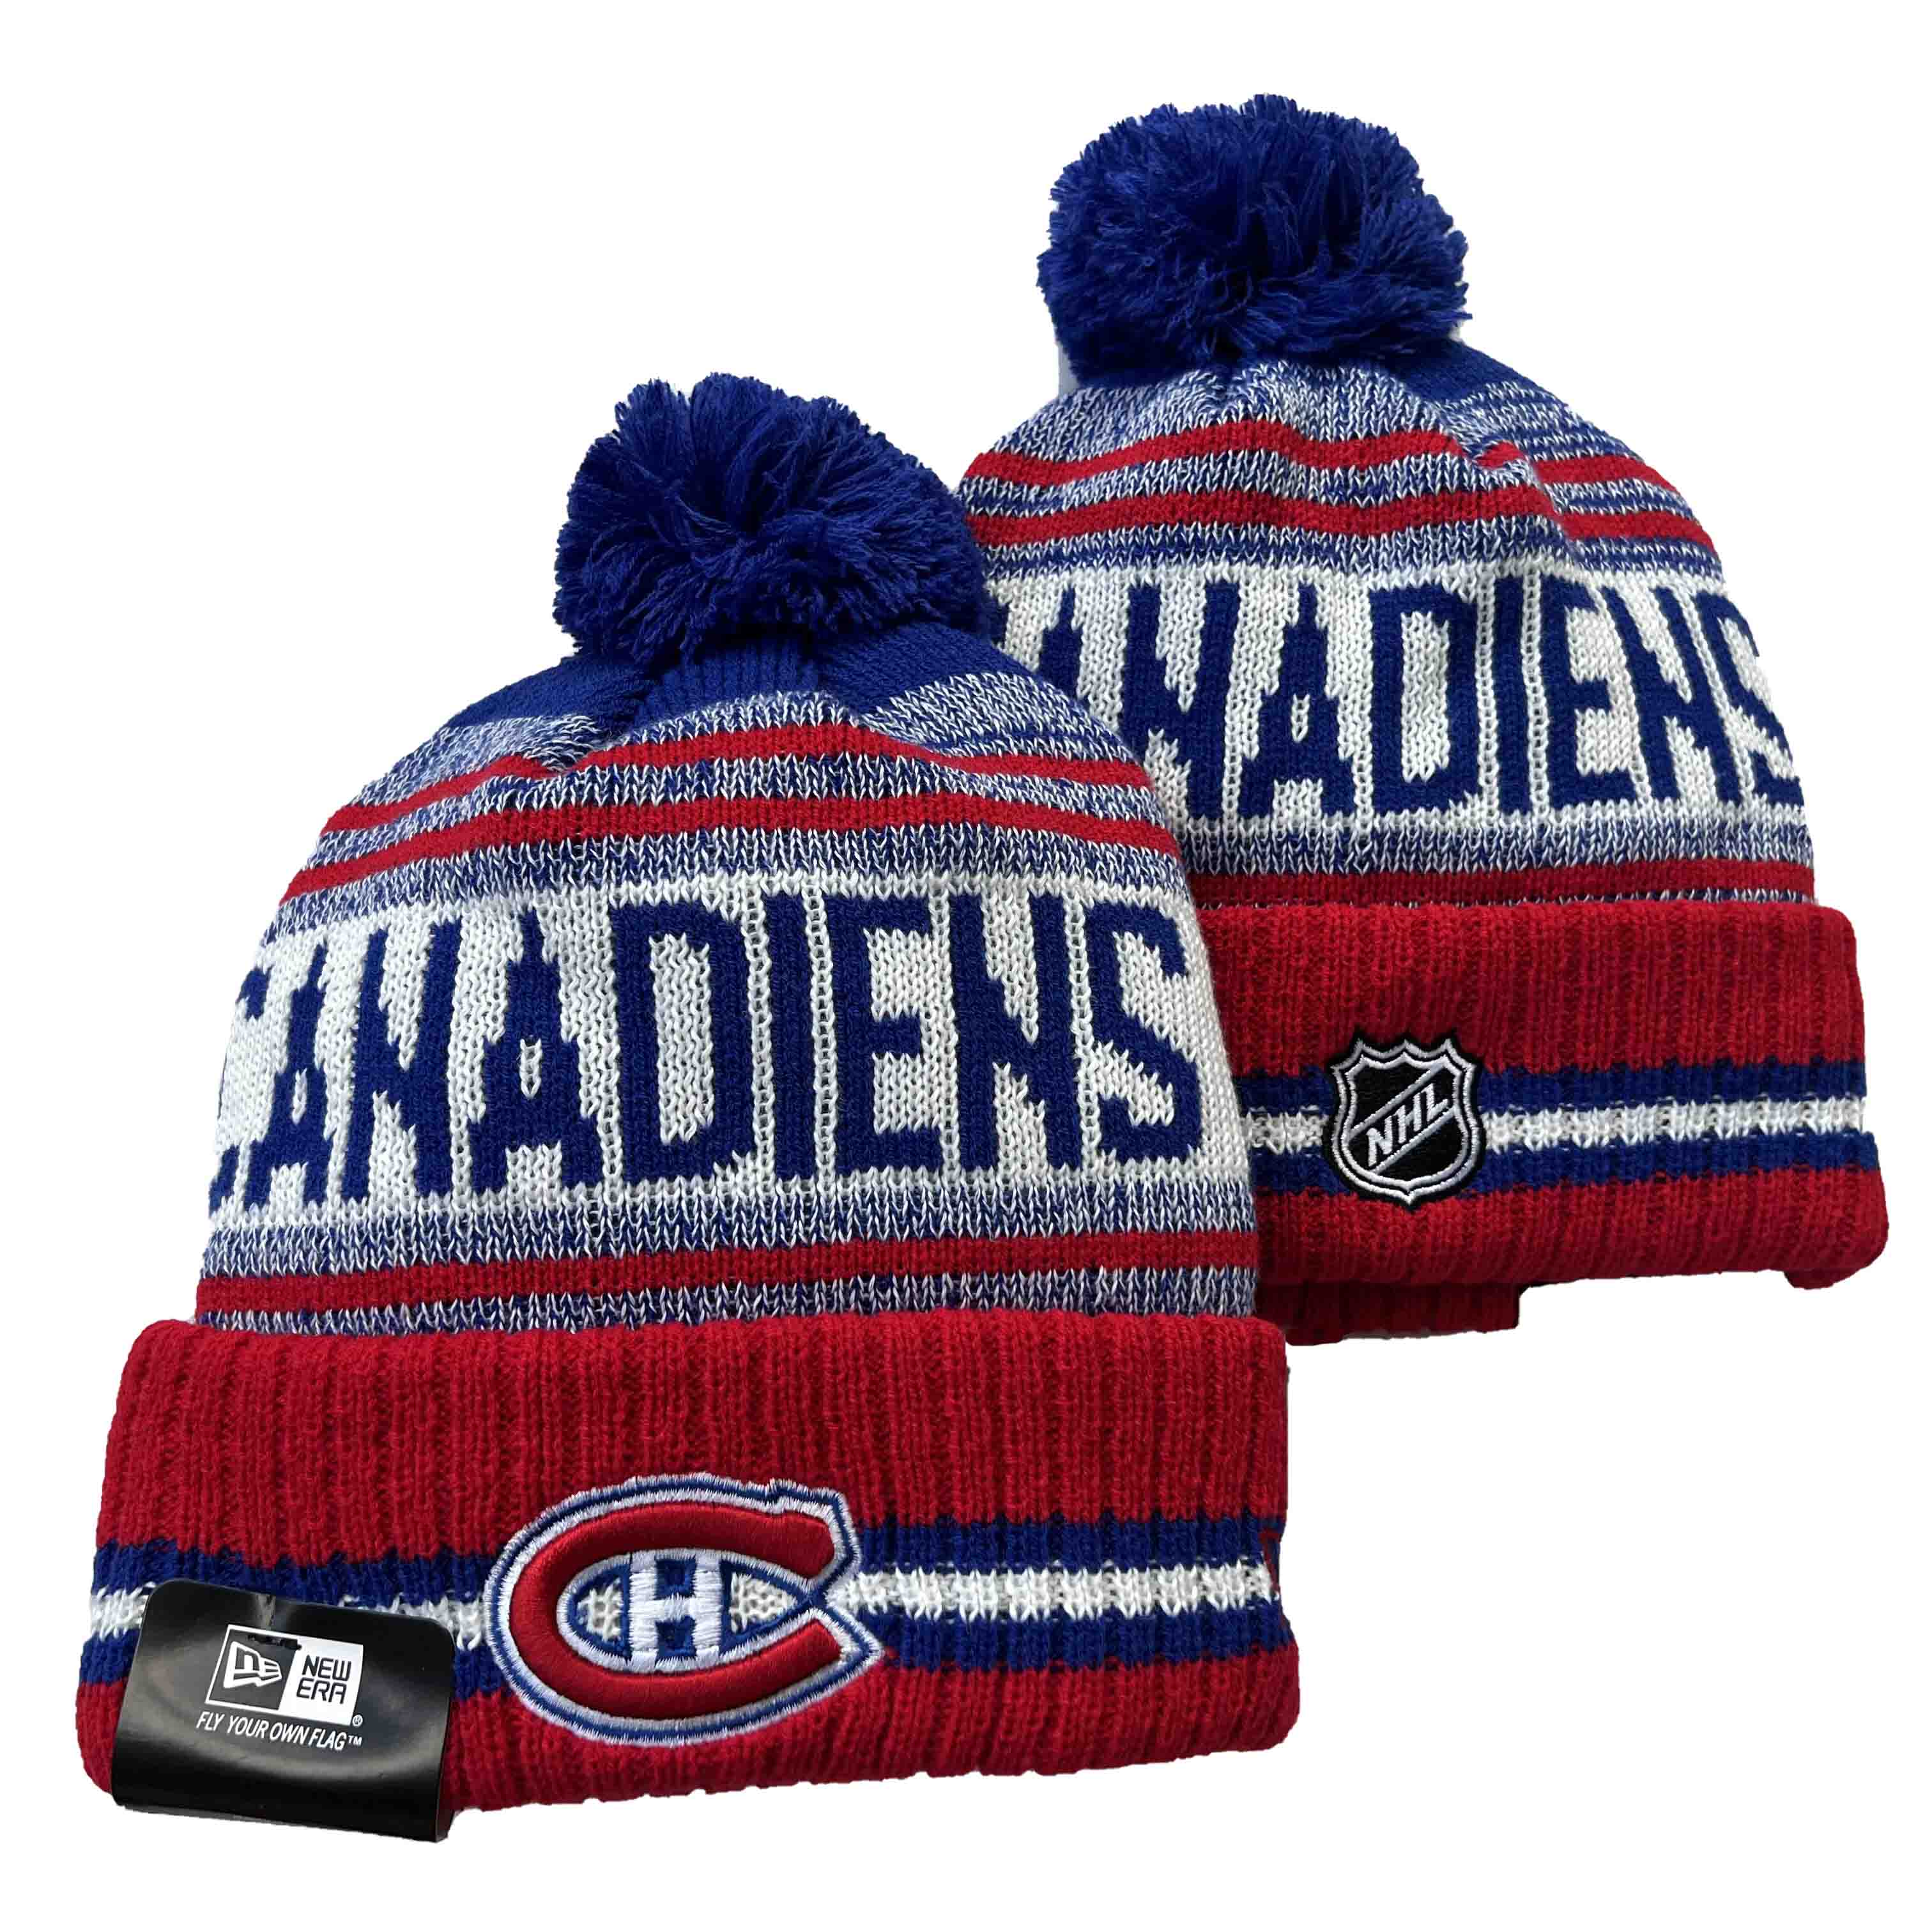 NHL Montreal Canadiens Beanies Knit Hats-YD1599